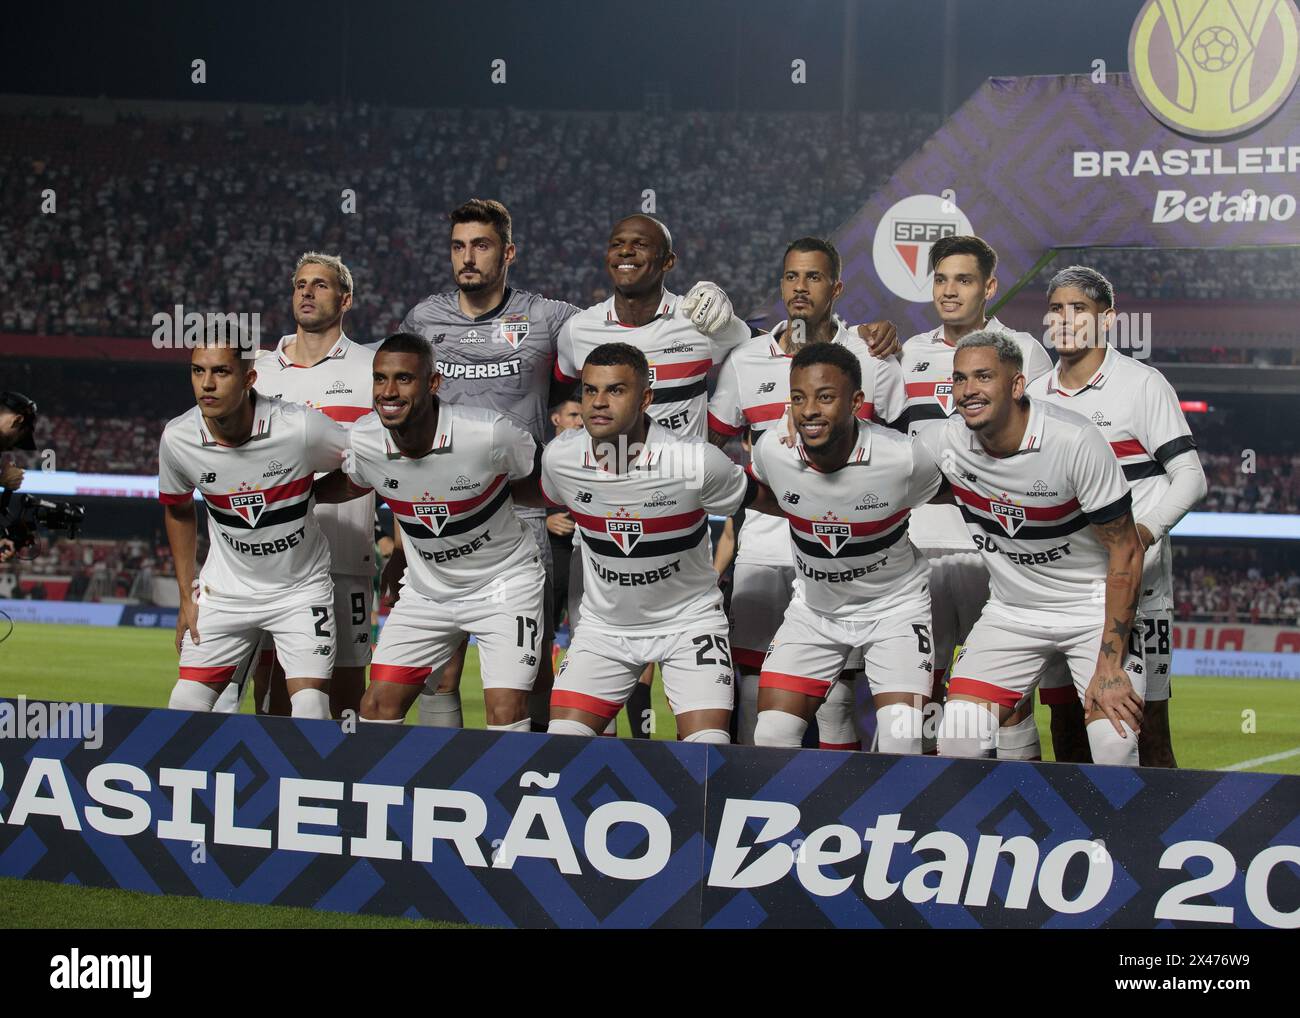 São Paulo (SP), April 29, 2024 - Football / Brazilian Championship 2024 - São Paulo team posed for picture during the match between São Paulo and Palm Stock Photo